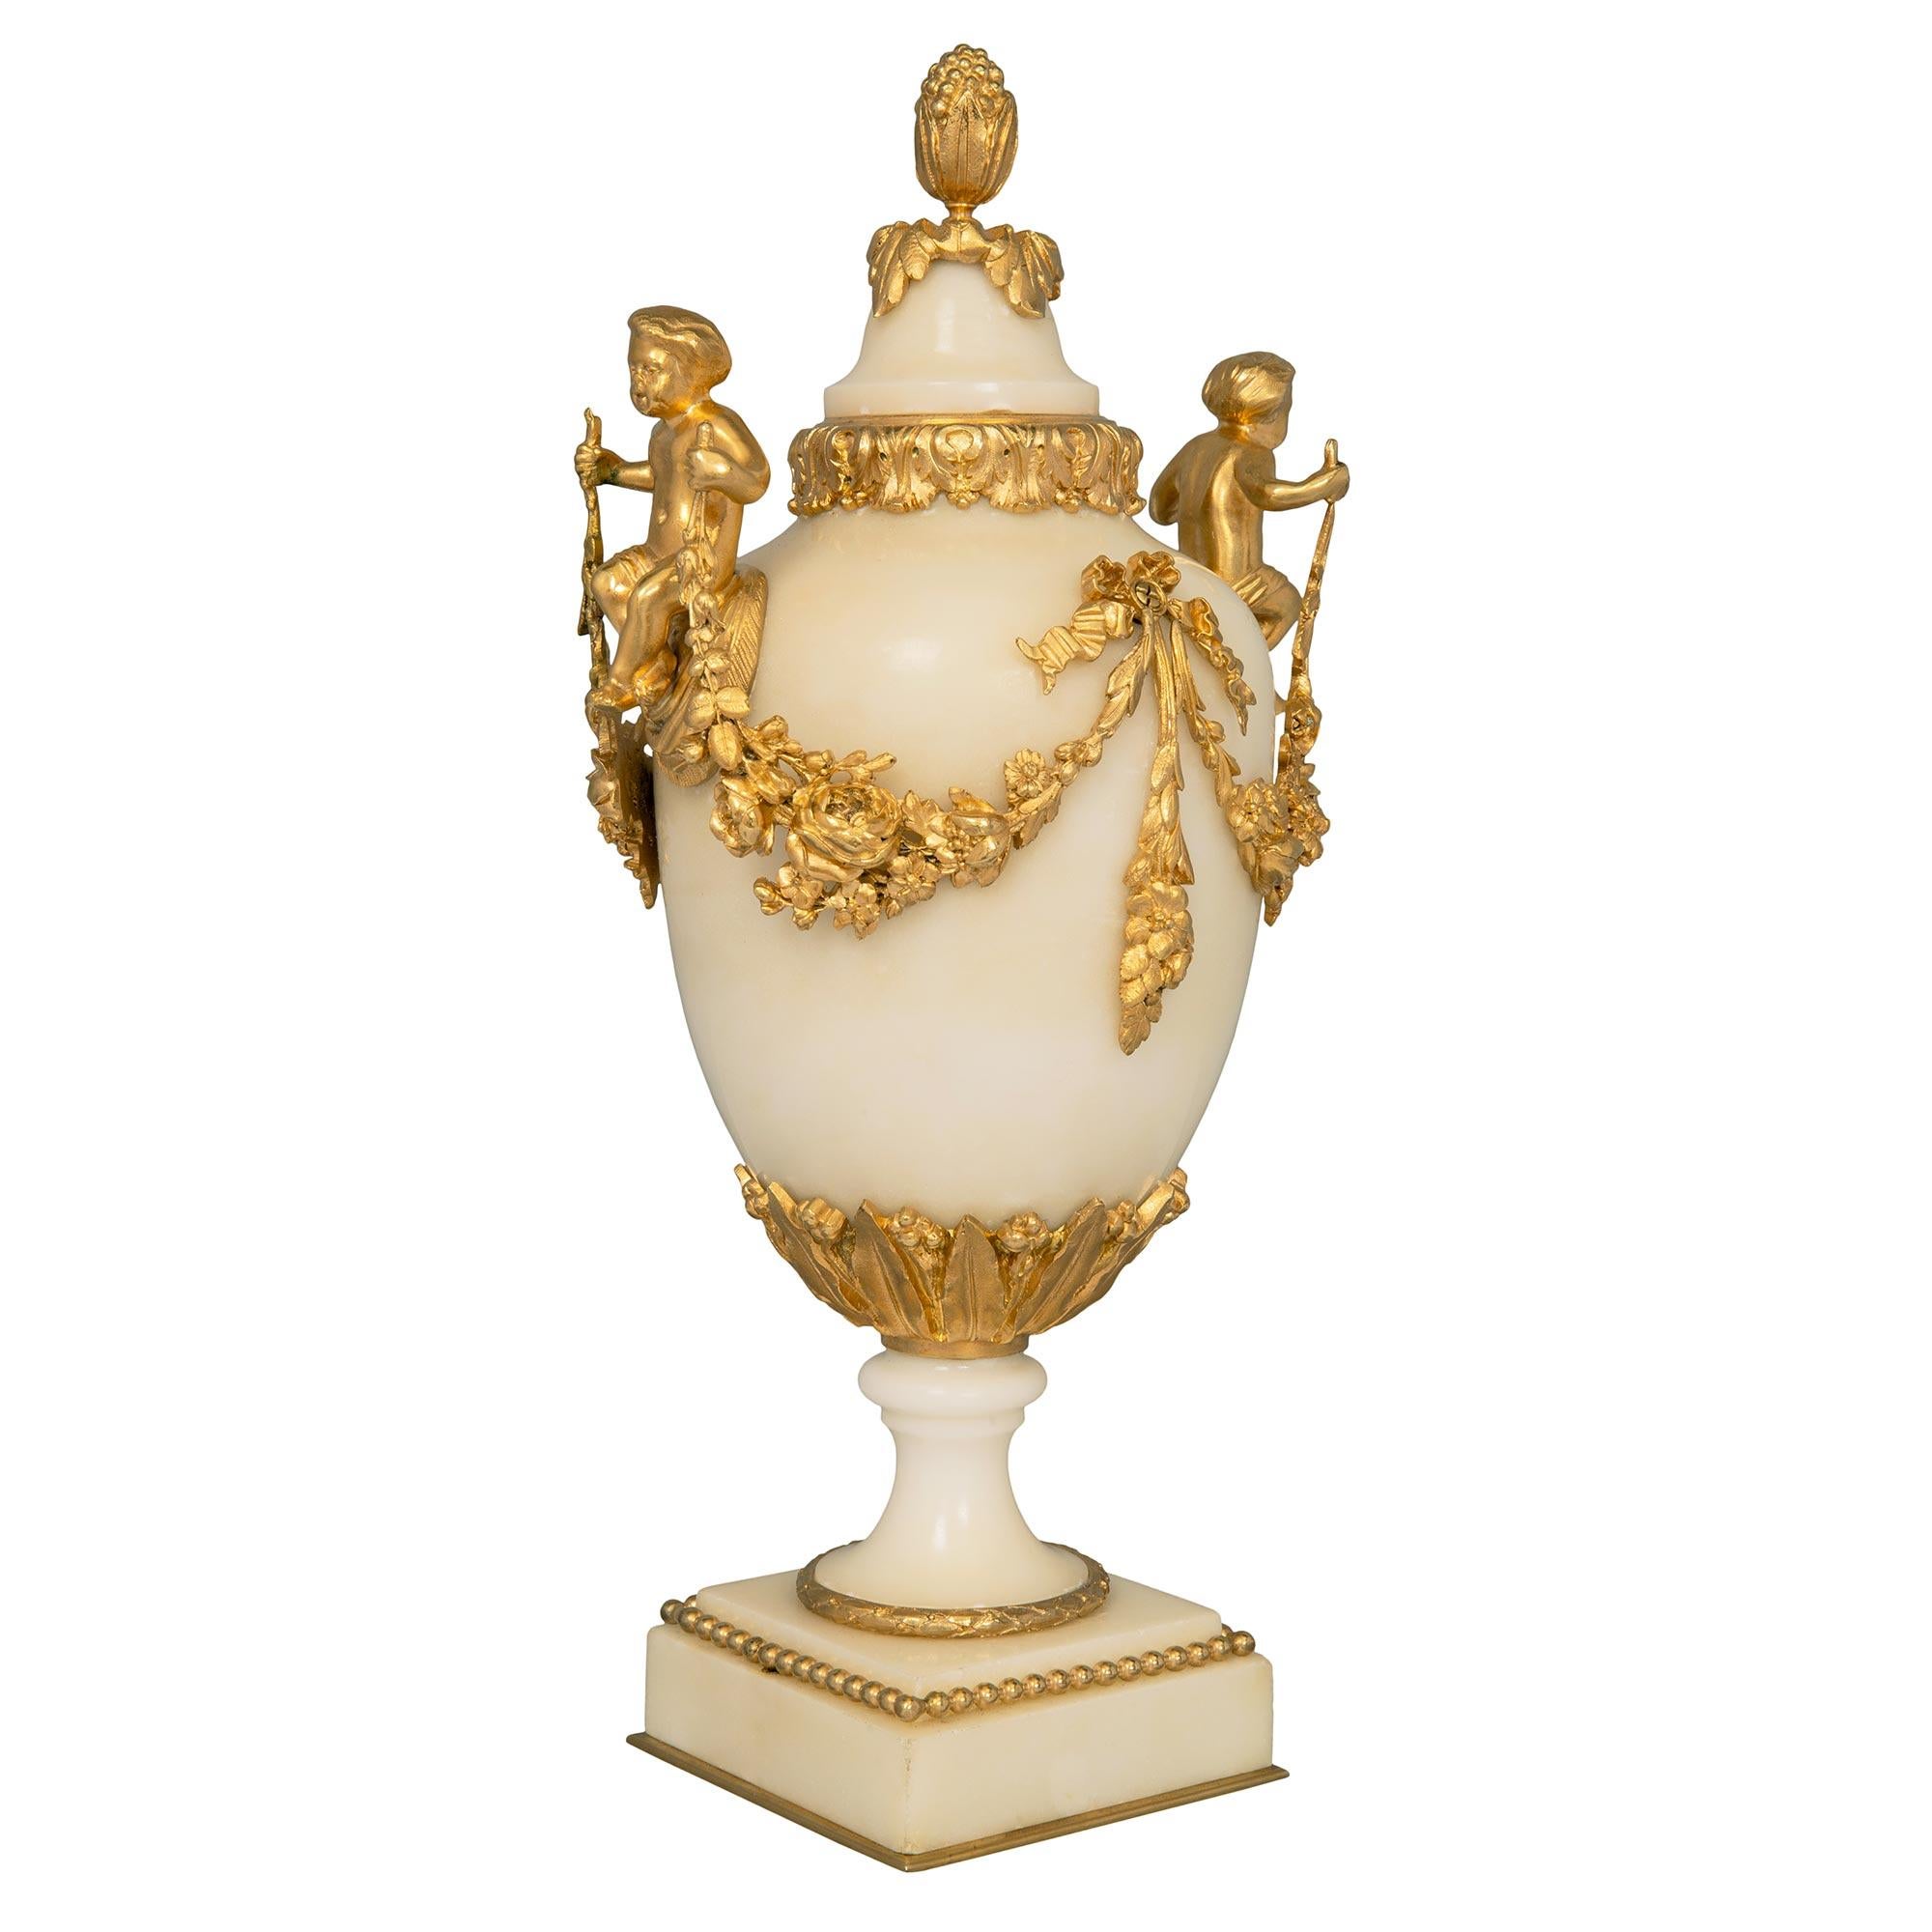 A most elegant pair of French 19th century Louis XVI st. ormolu and white Carrara marble urns. Each urn is raised by a square base with a fine bottom ormolu fillet and a wrap around beaded band. Below the socle pedestals are fine berried laurel